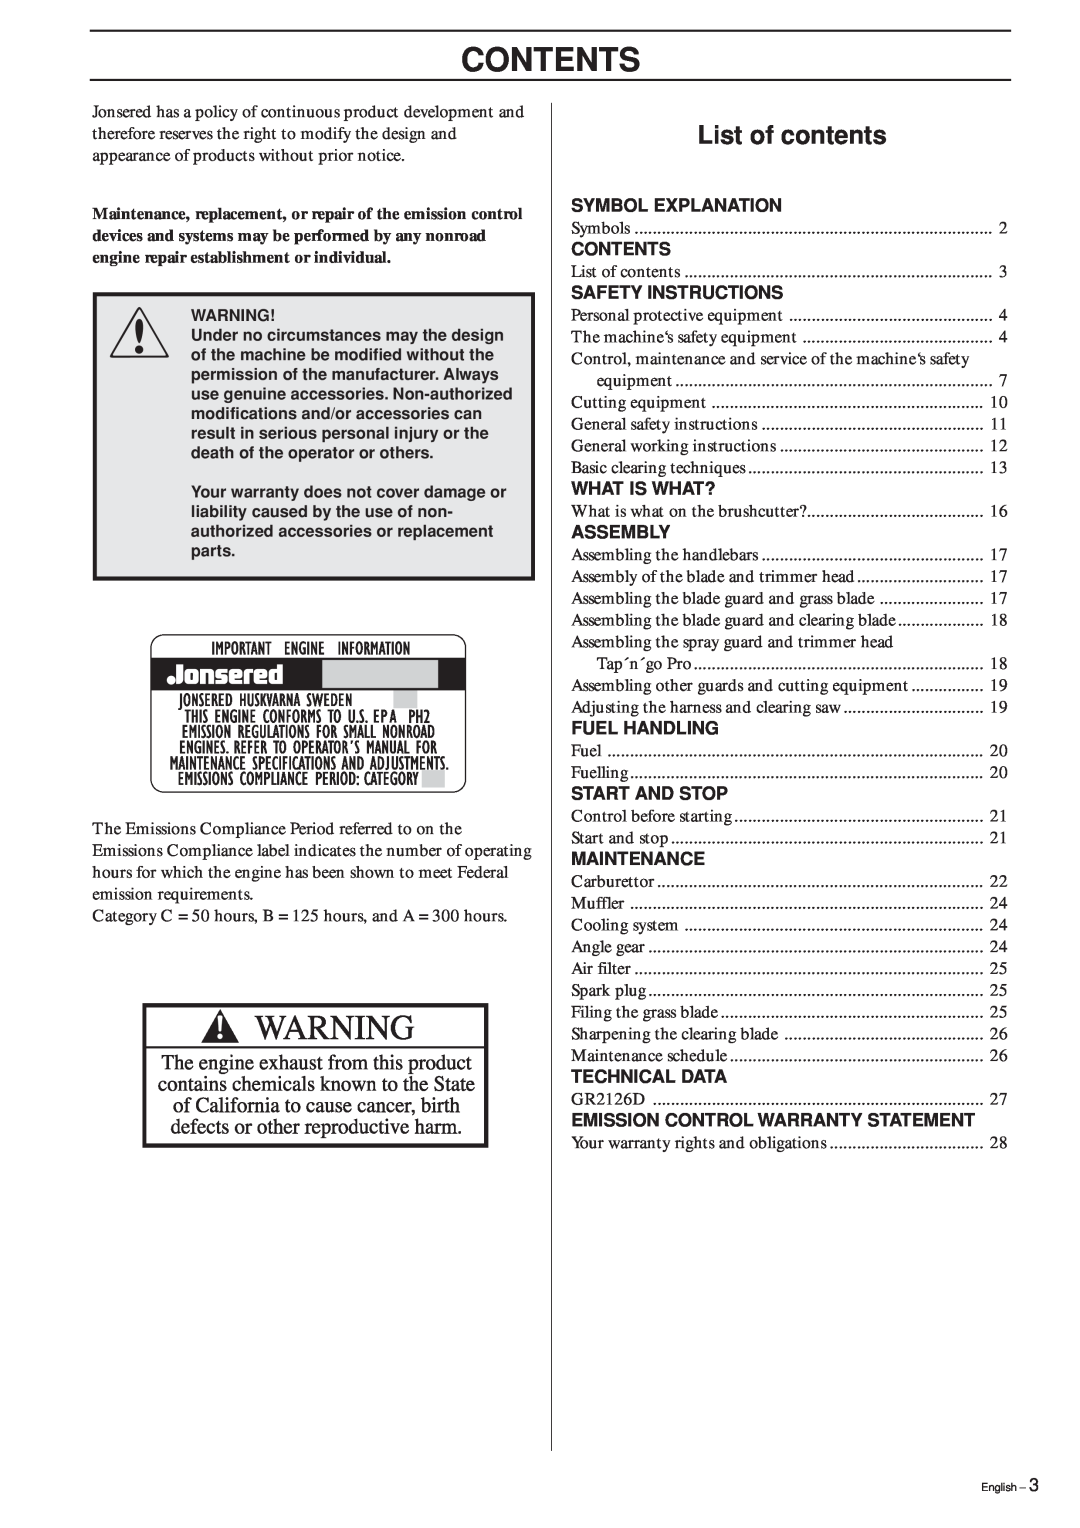 Jonsered GR 2126D manual Contents, List of contents 